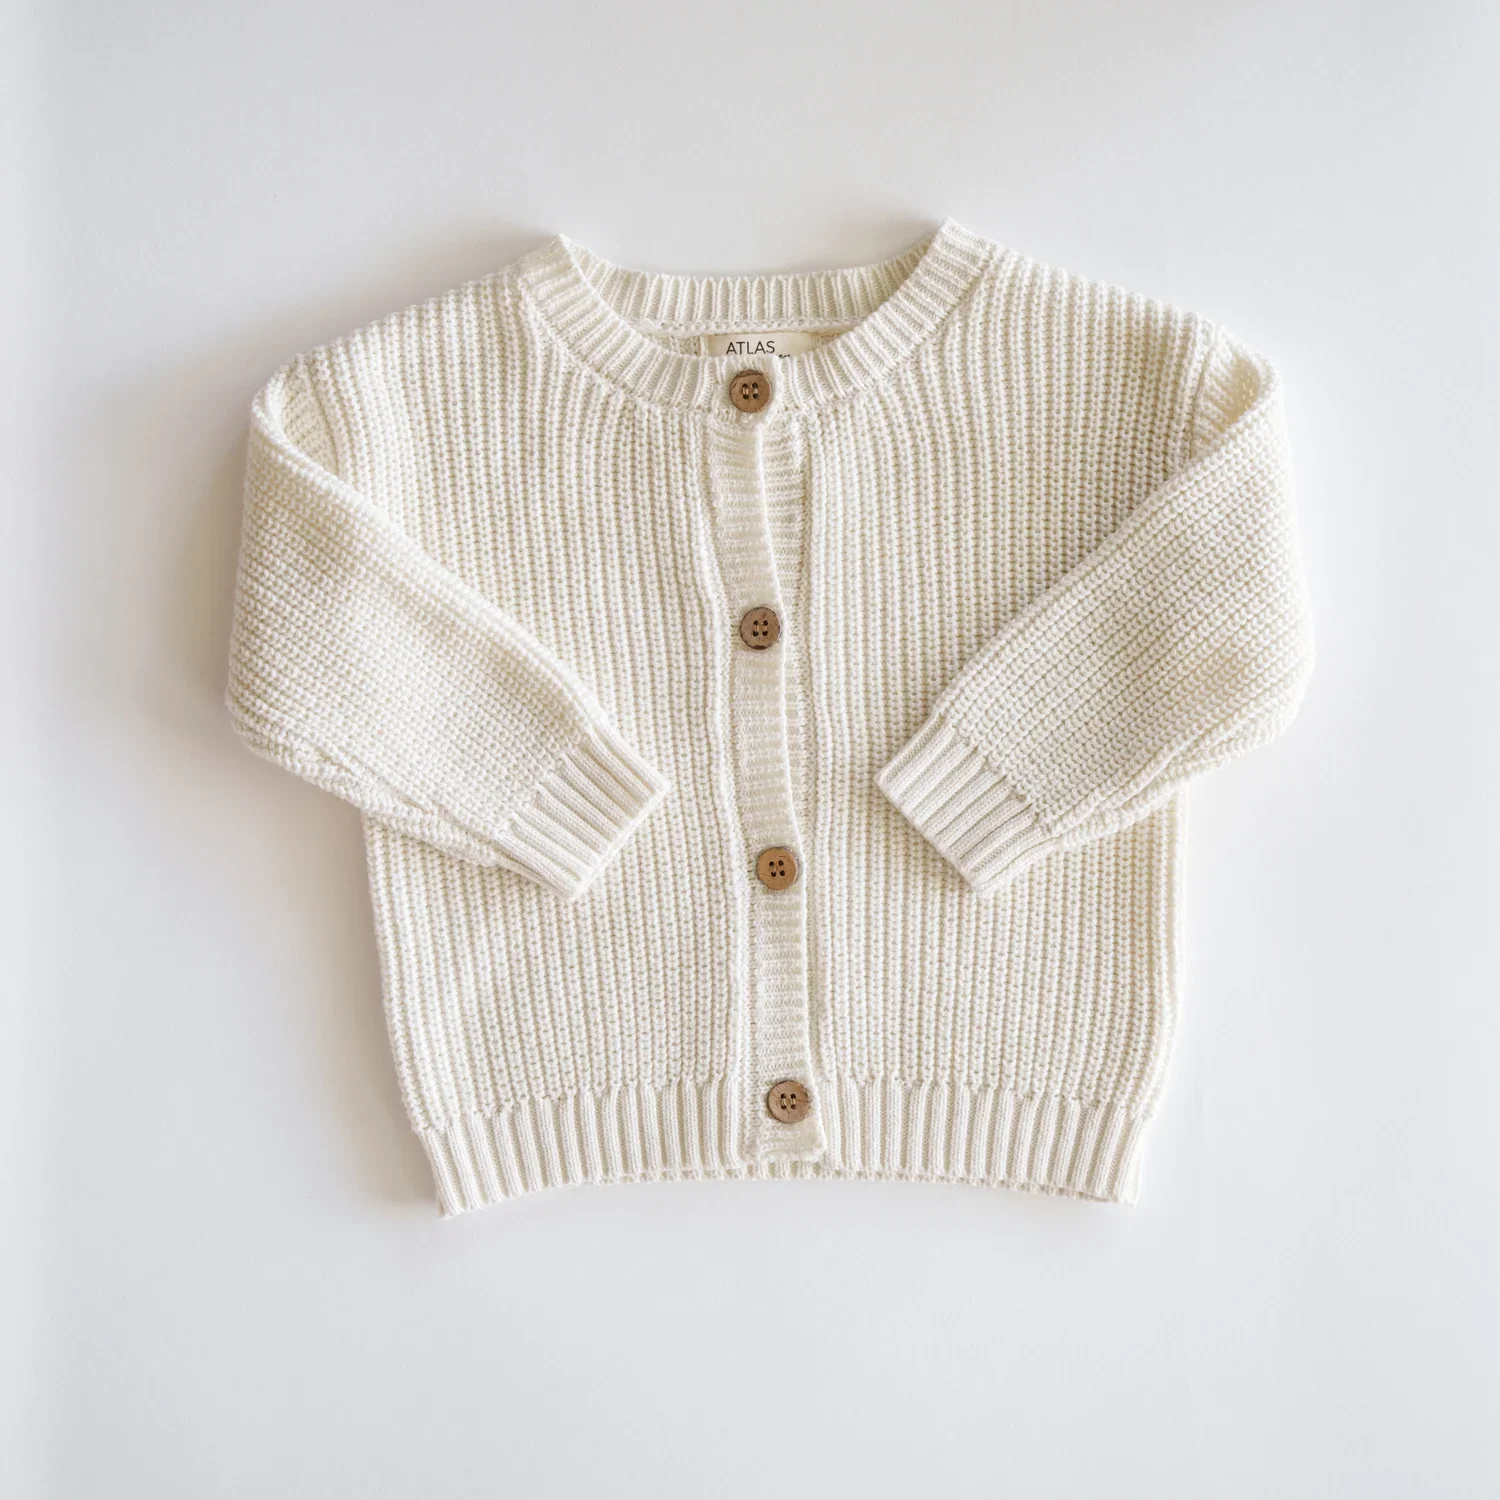 Extra Discount Baby Cardigan Sweater Knit Sweater Cotton Knitted ...